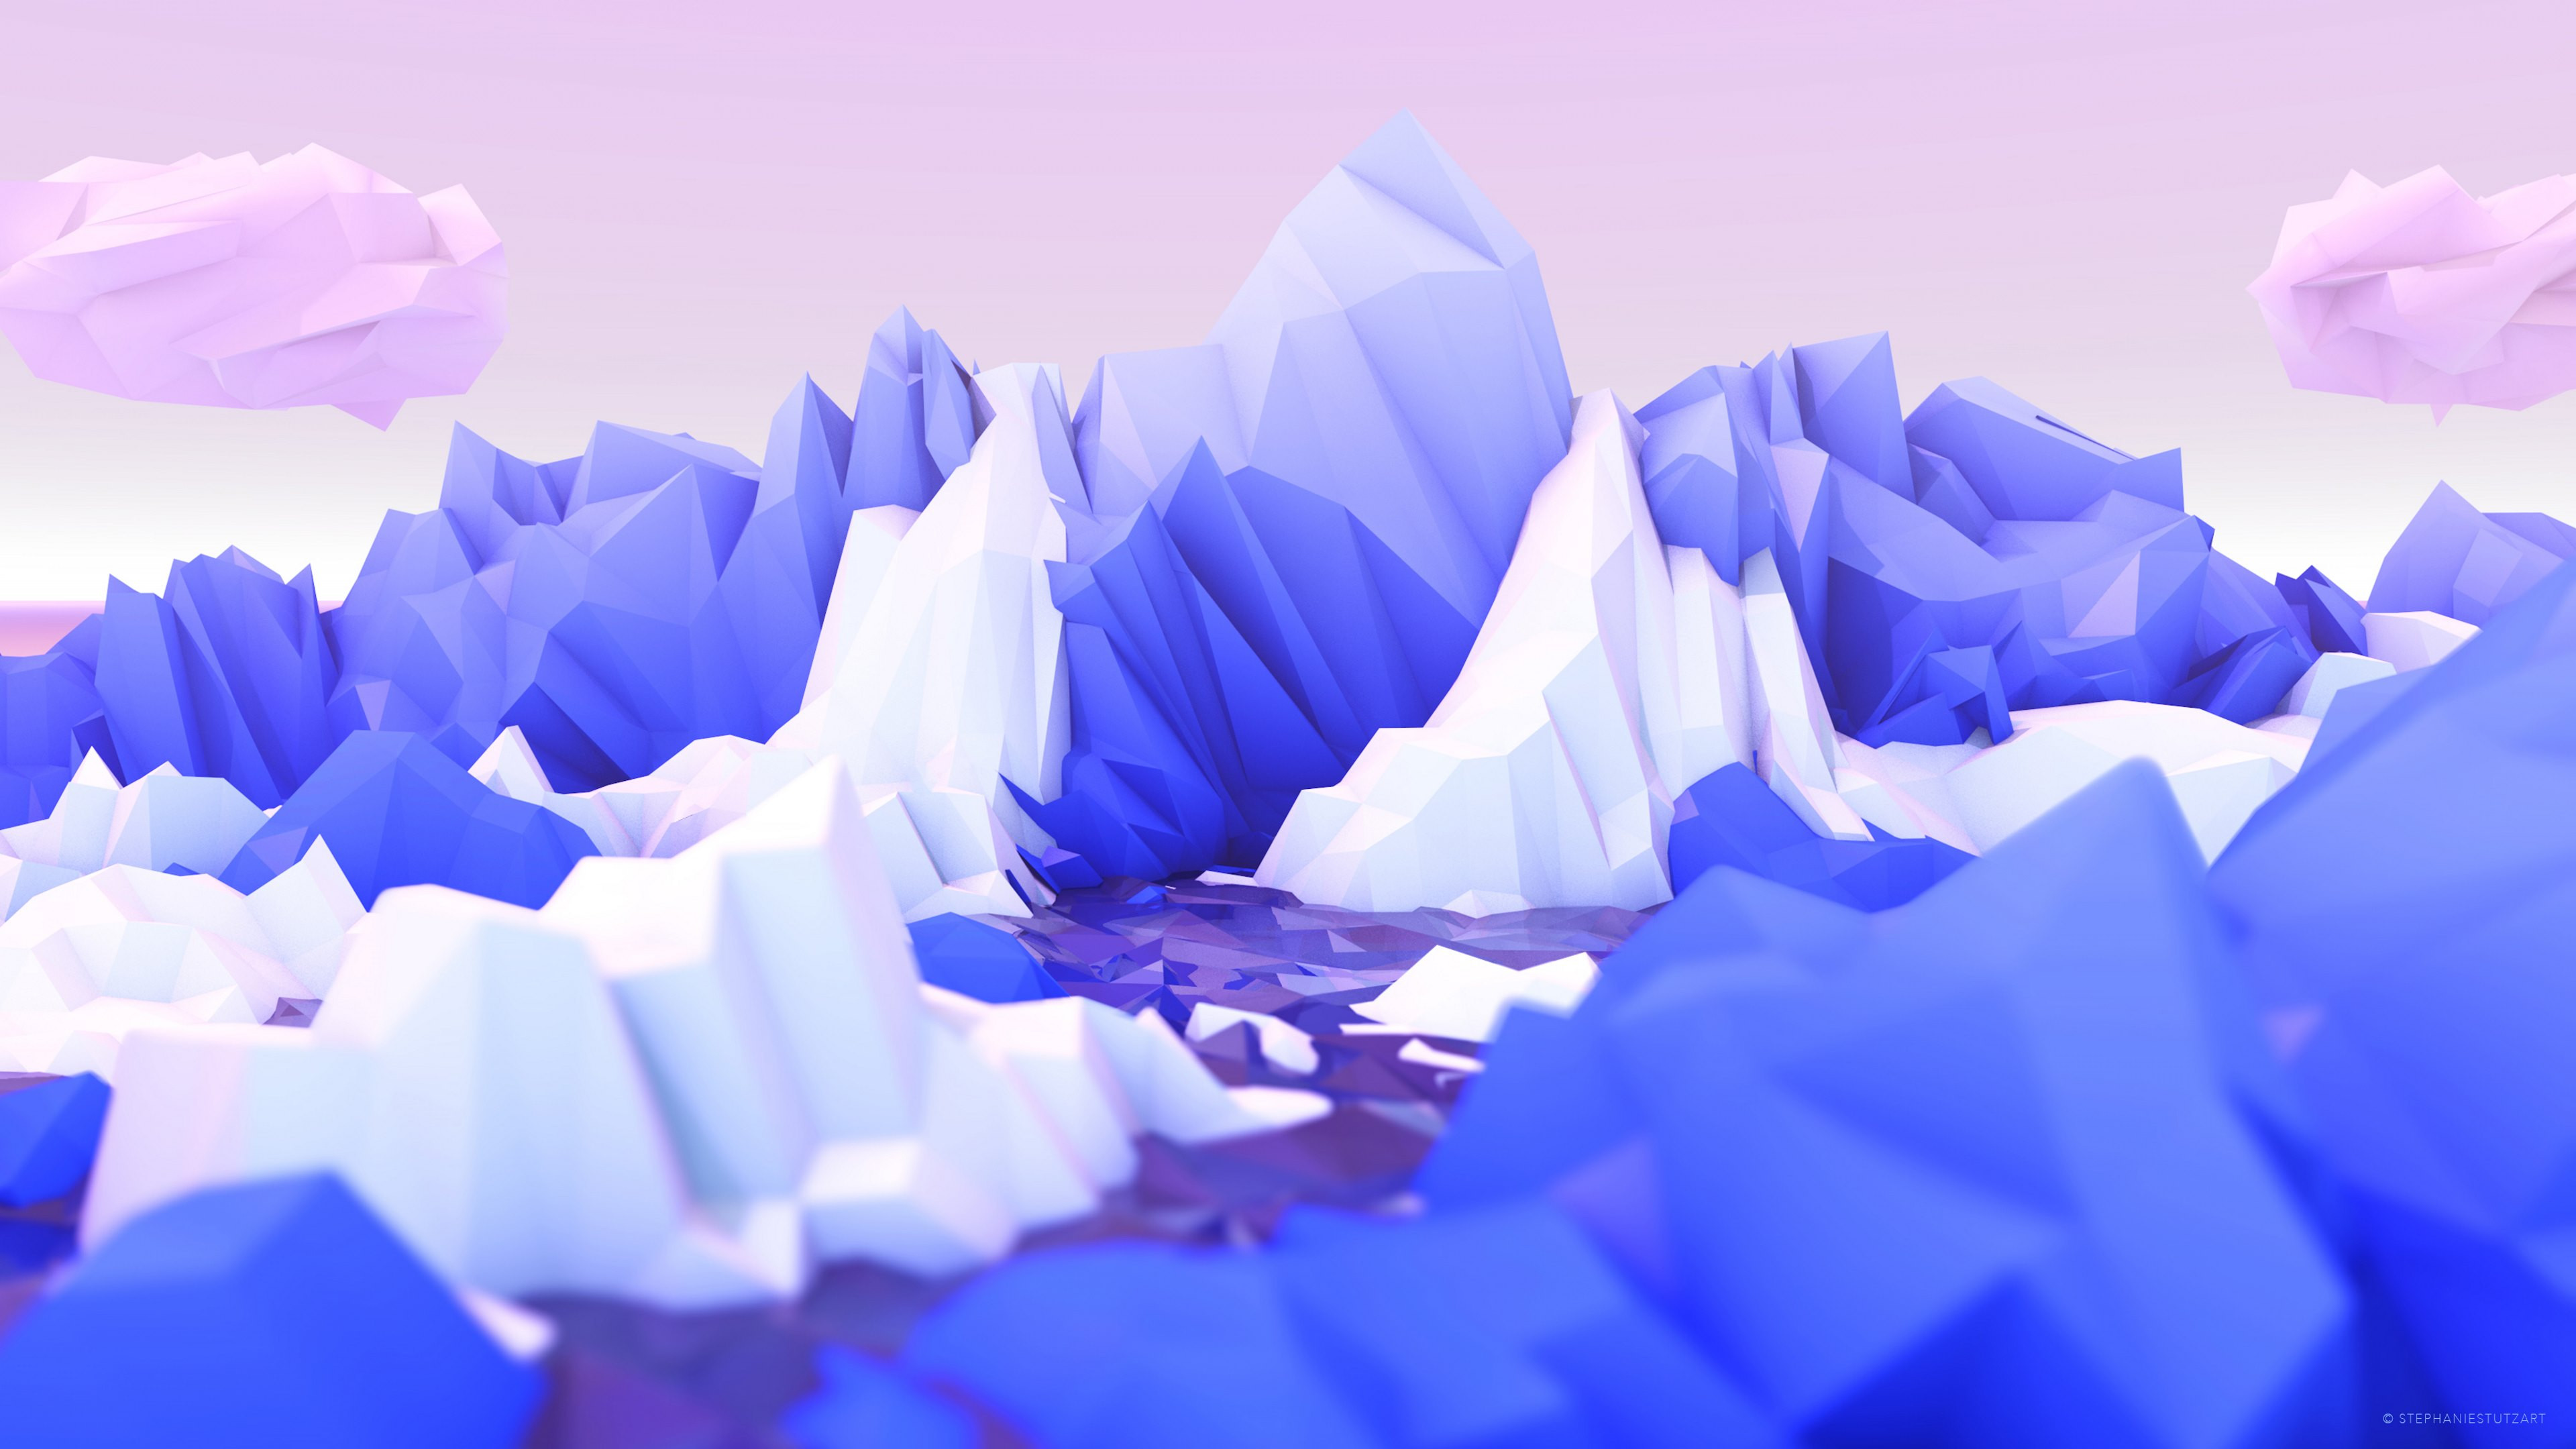 Low poly graphic design wallpaper 3840x2160